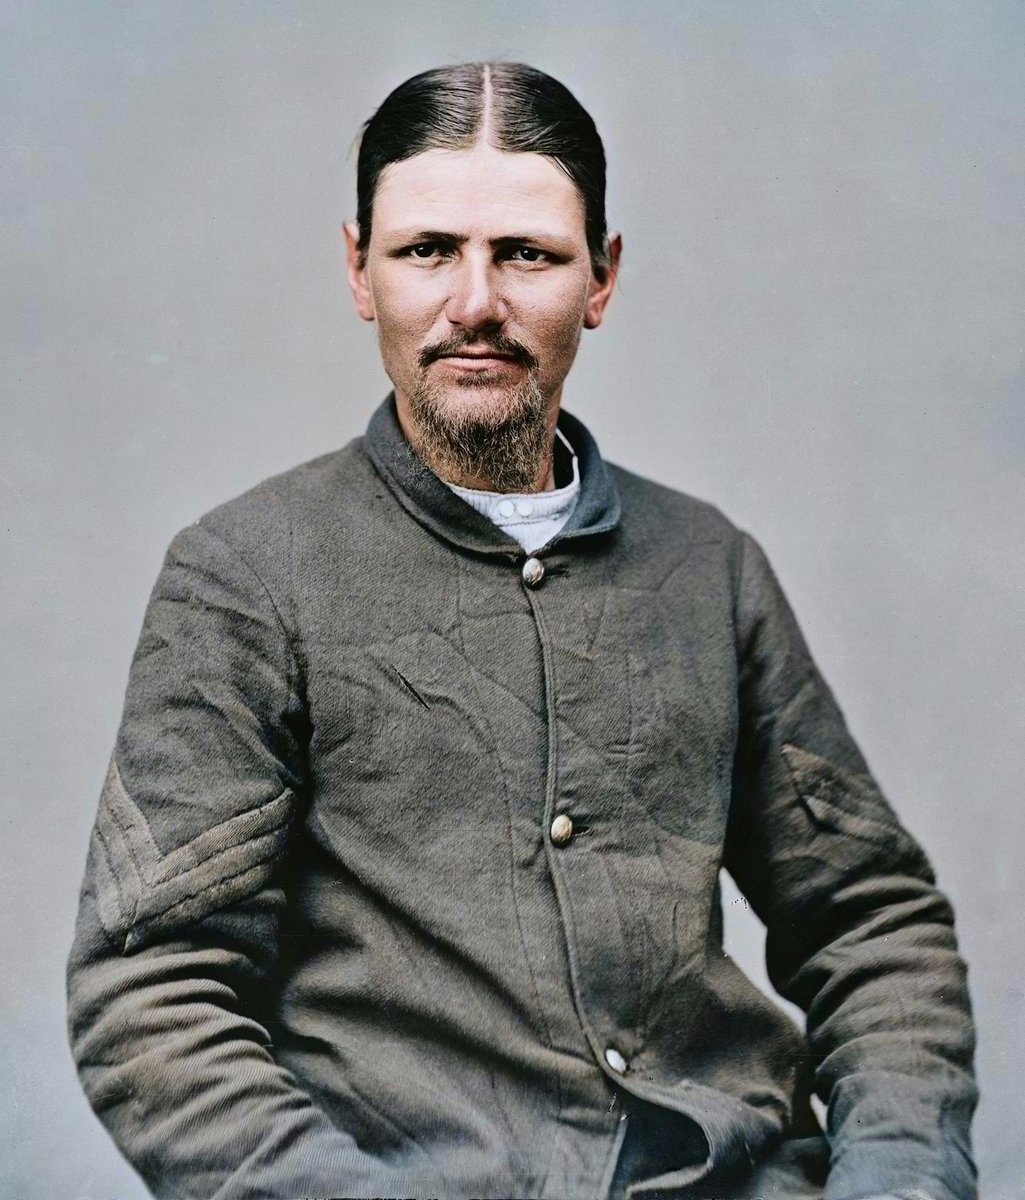 Did you know the soldier that killed John Wilkes Booth was from #TroyNY.
Image colorized and restored. 

Expanding on my earlier post, it's intriguing to note that four years before Abraham Lincoln's assassination by John Wilkes Booth, both Lincoln and Booth were in Albany on the